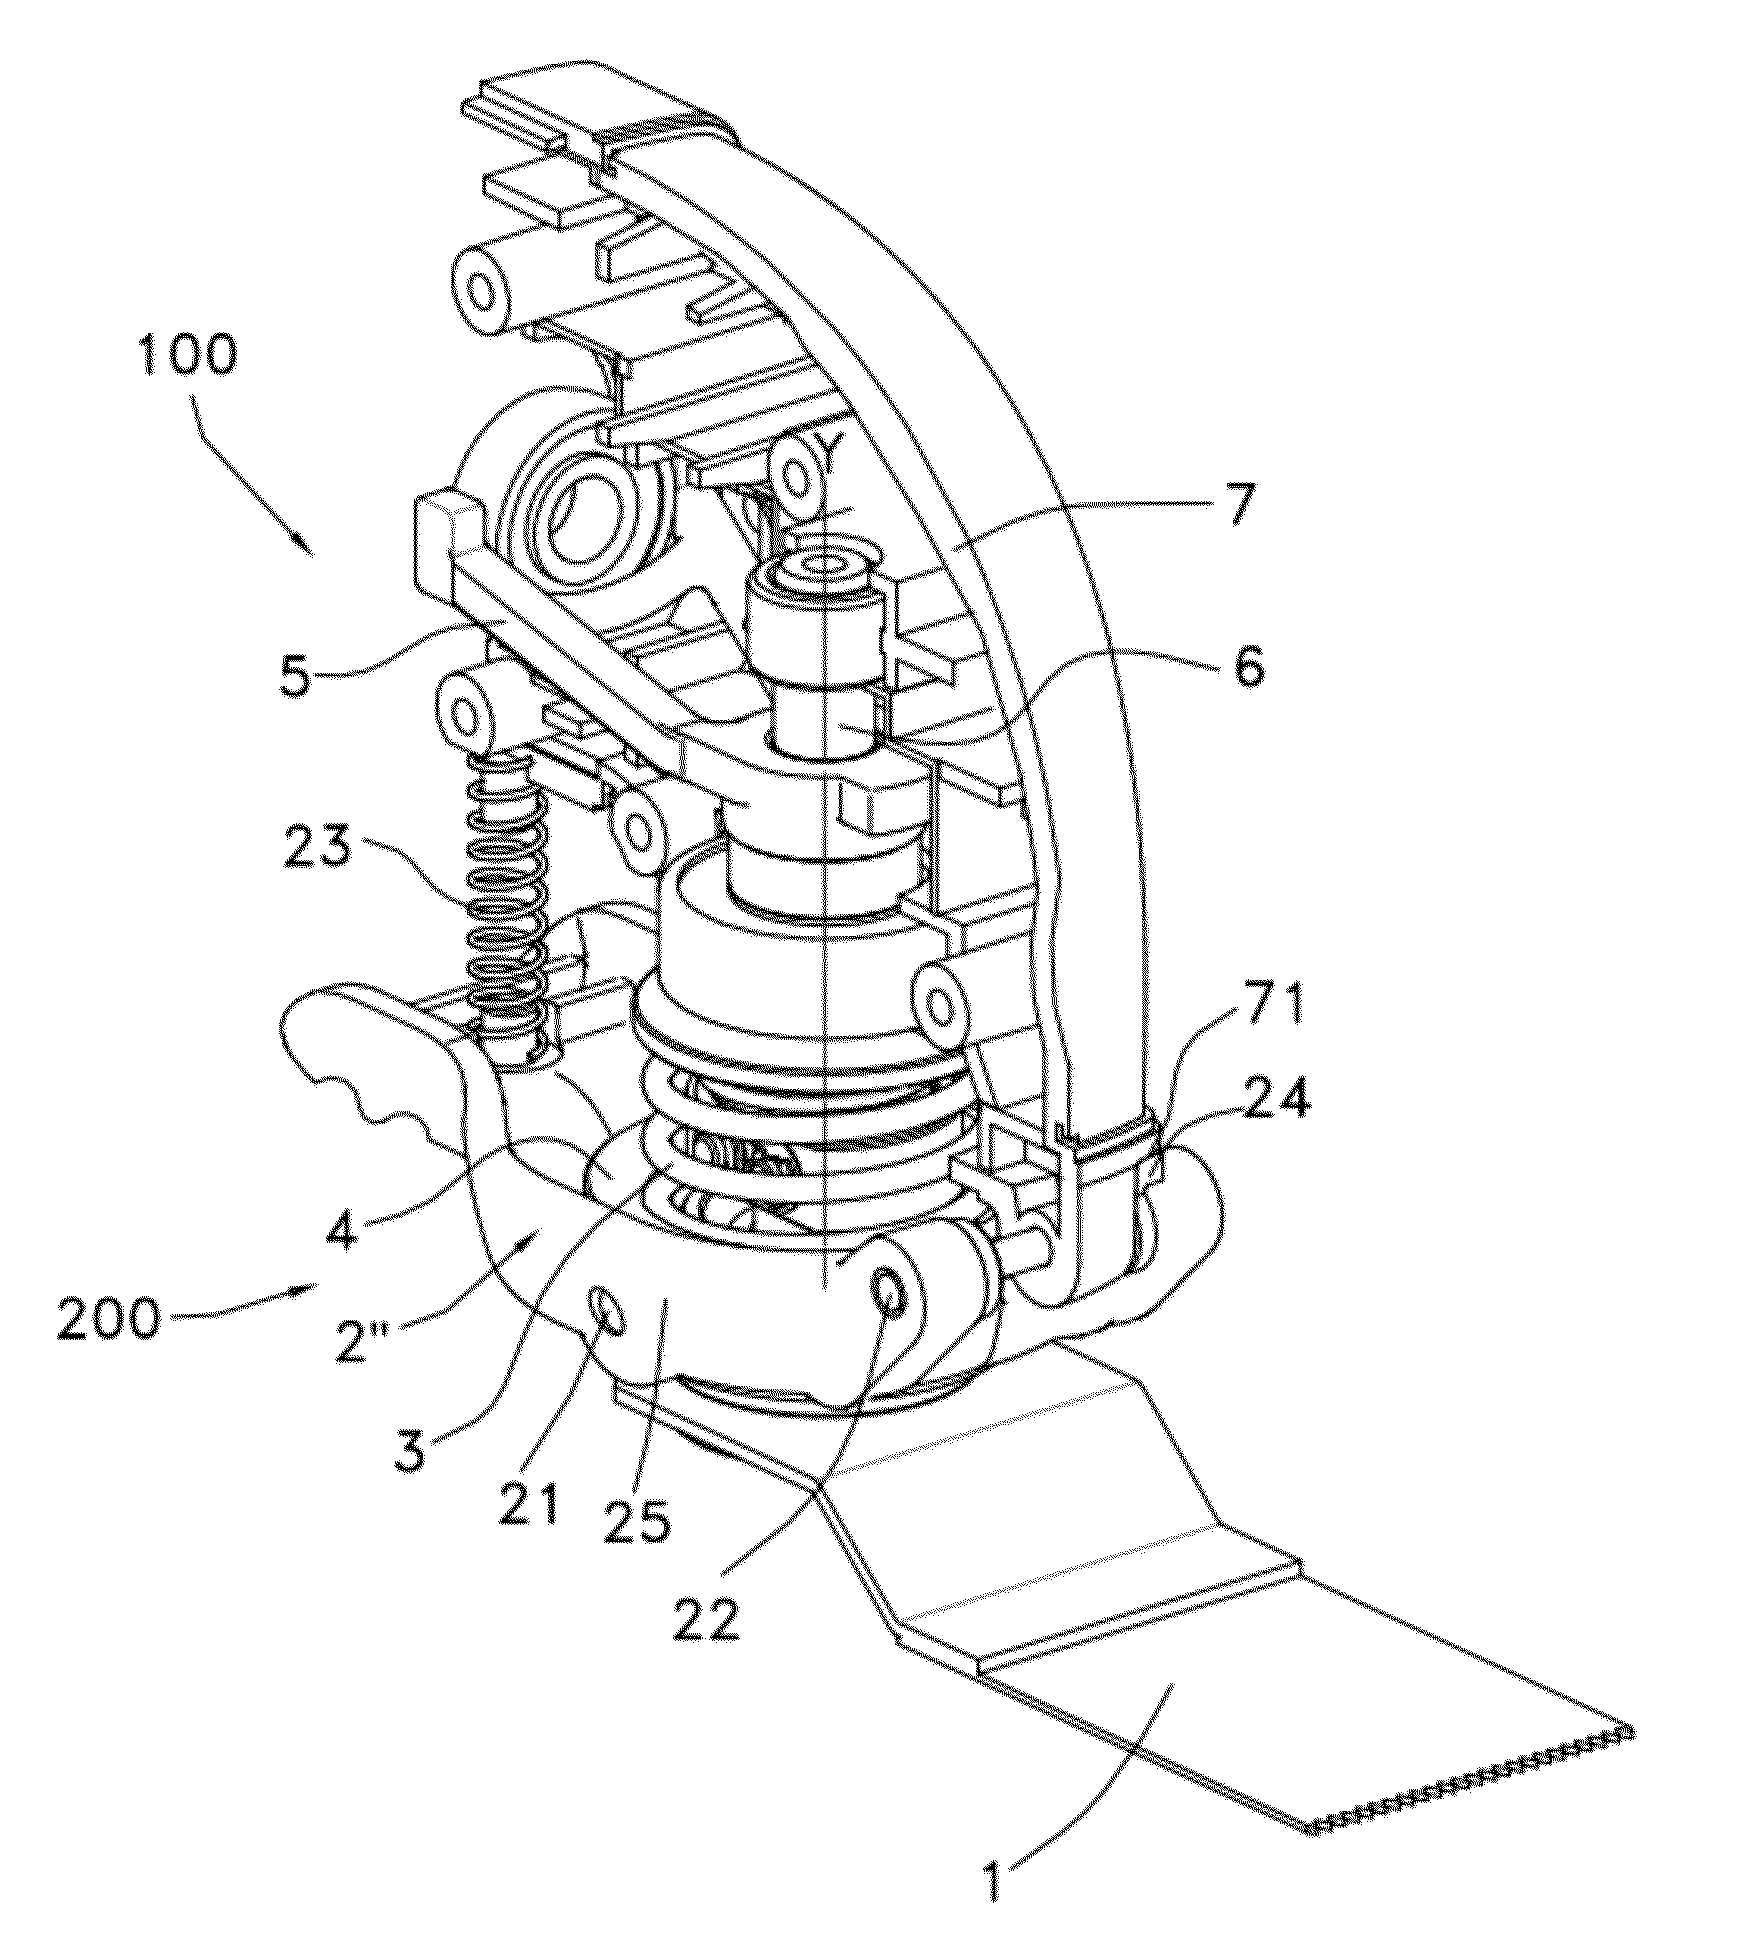 Power tool having a clamping device for a working element